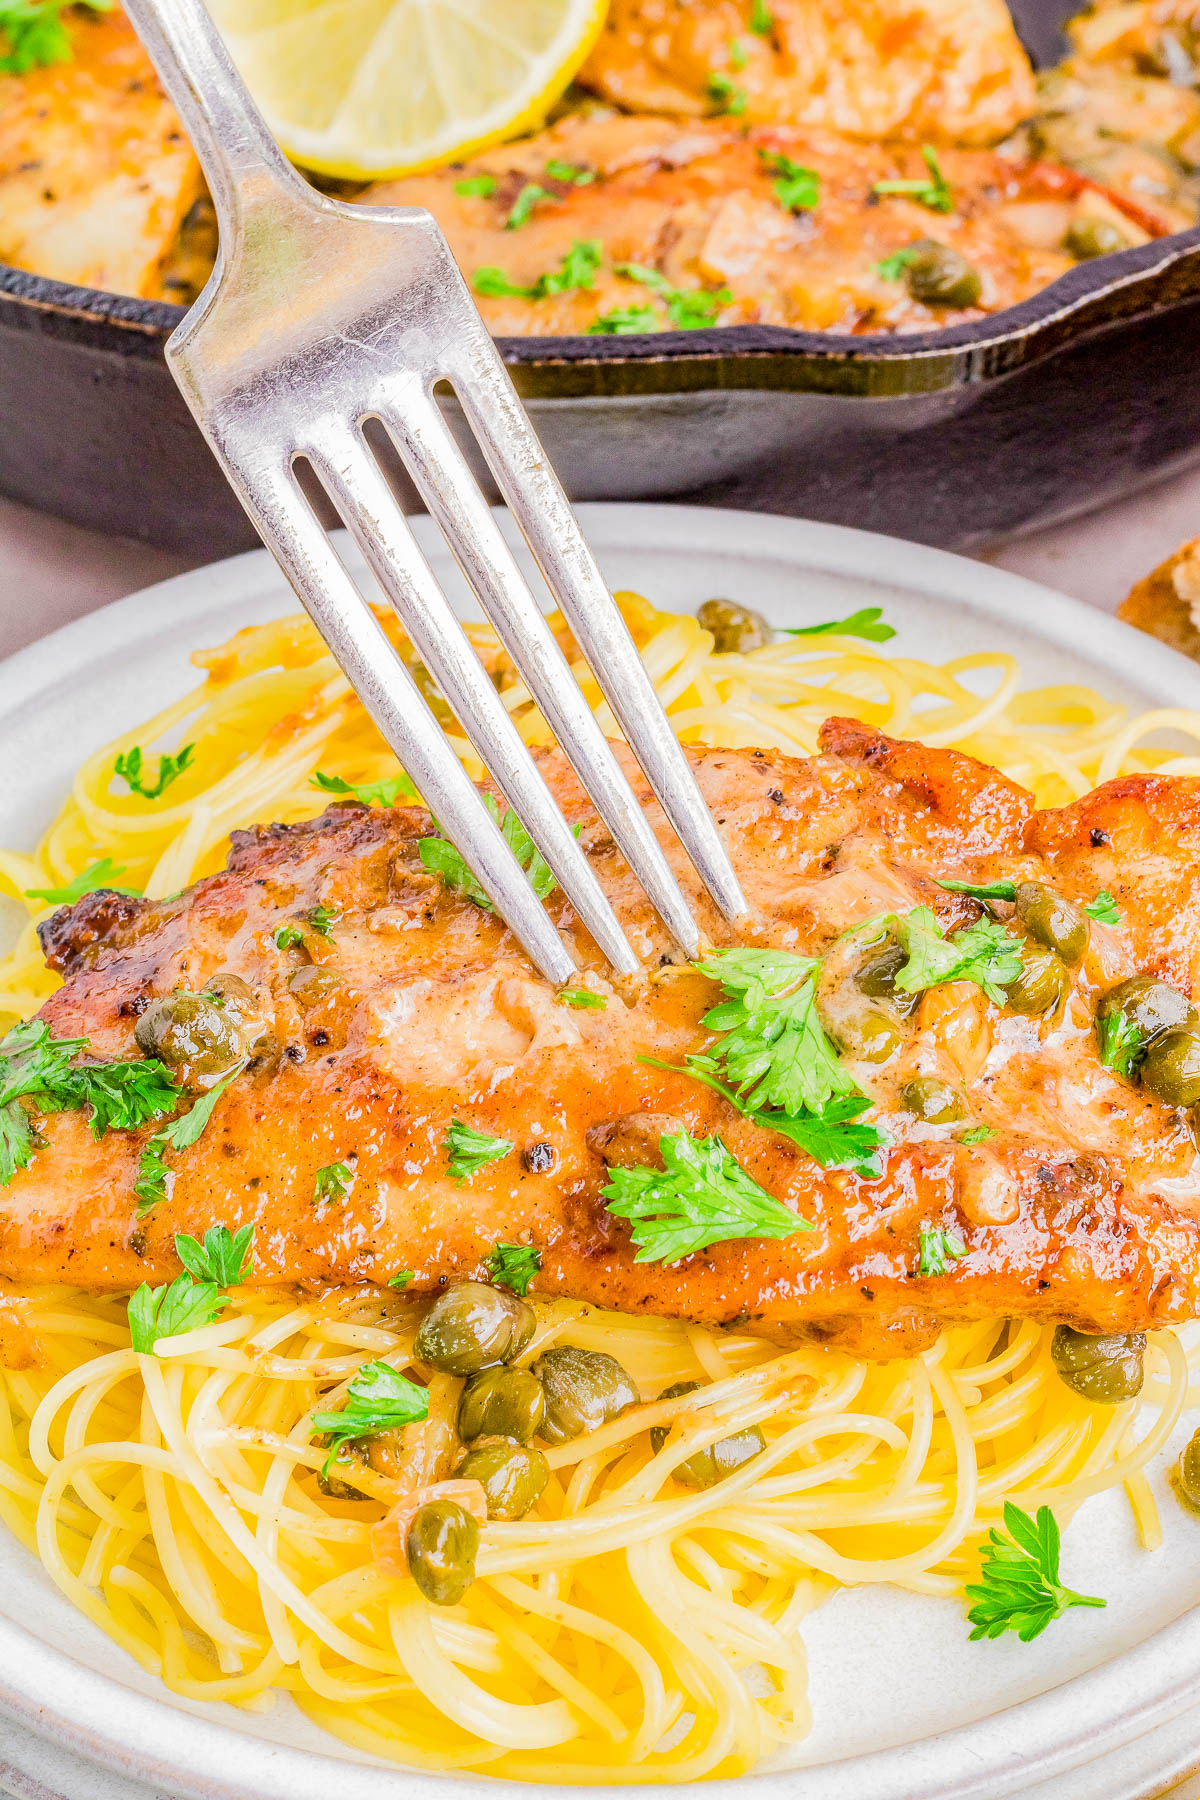 A plate of spaghetti topped with a grilled chicken breast garnished with capers and parsley, with a fork on top.